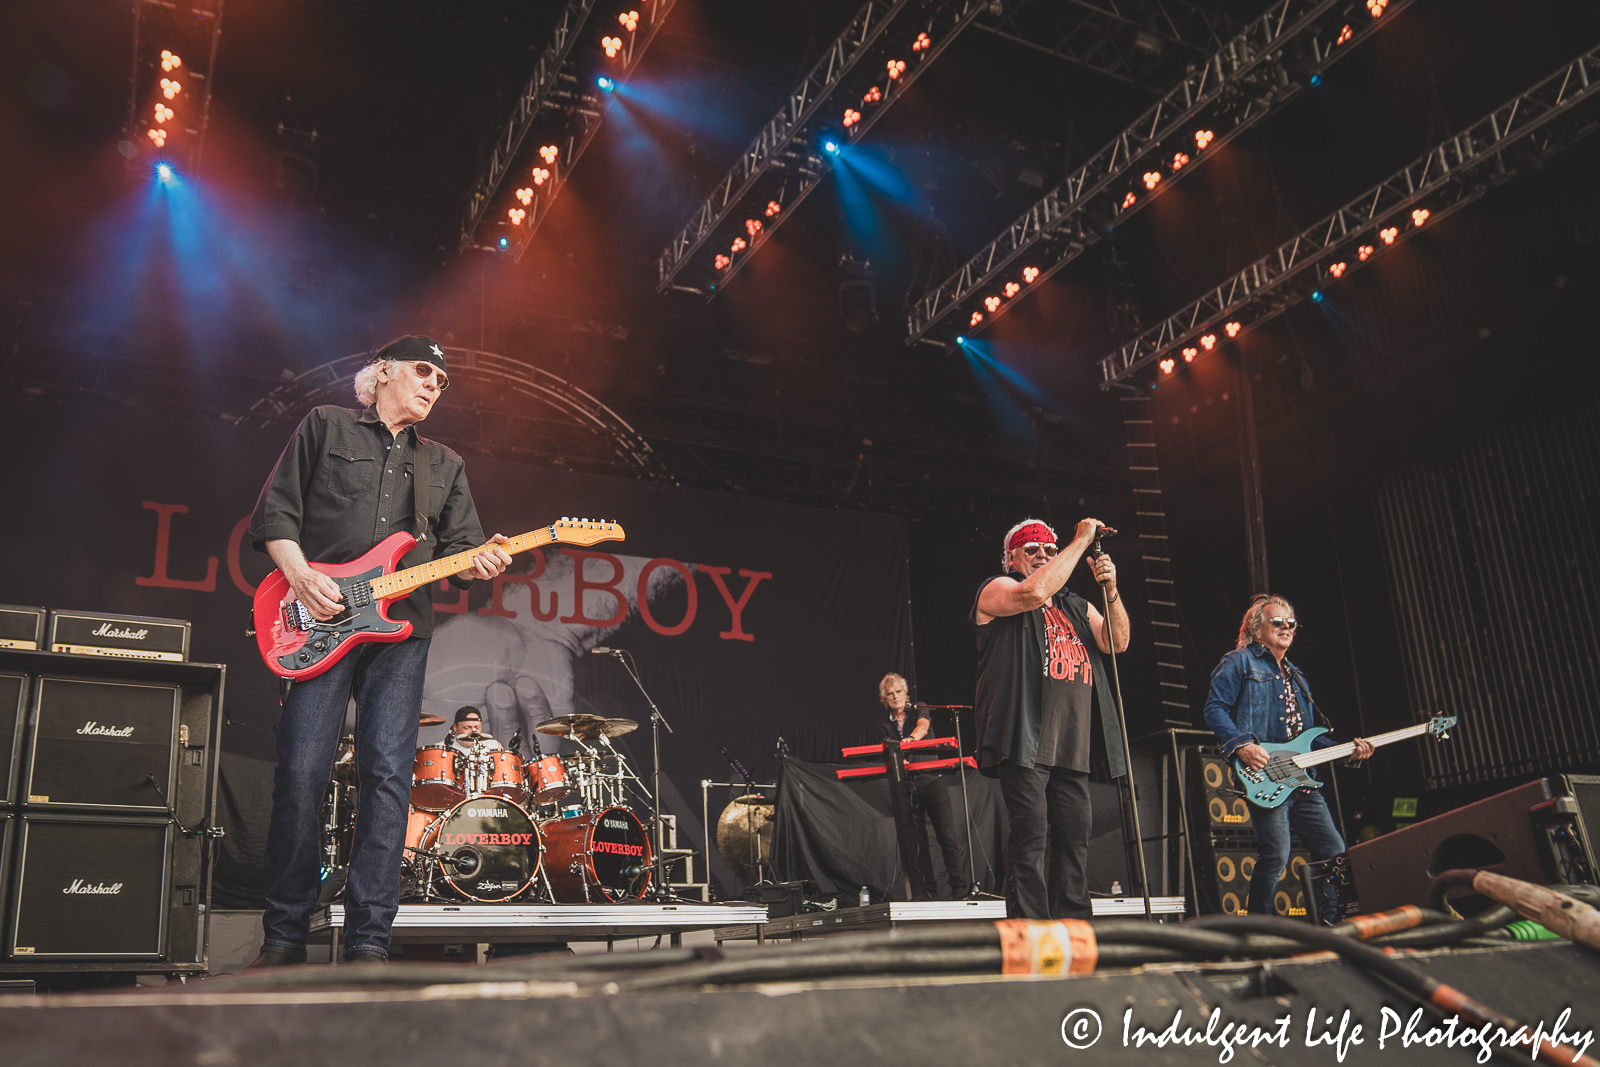 Canadian rock band Loverboy performing live in concert at Kansas City's Starlight Theatre on July 18, 2023.